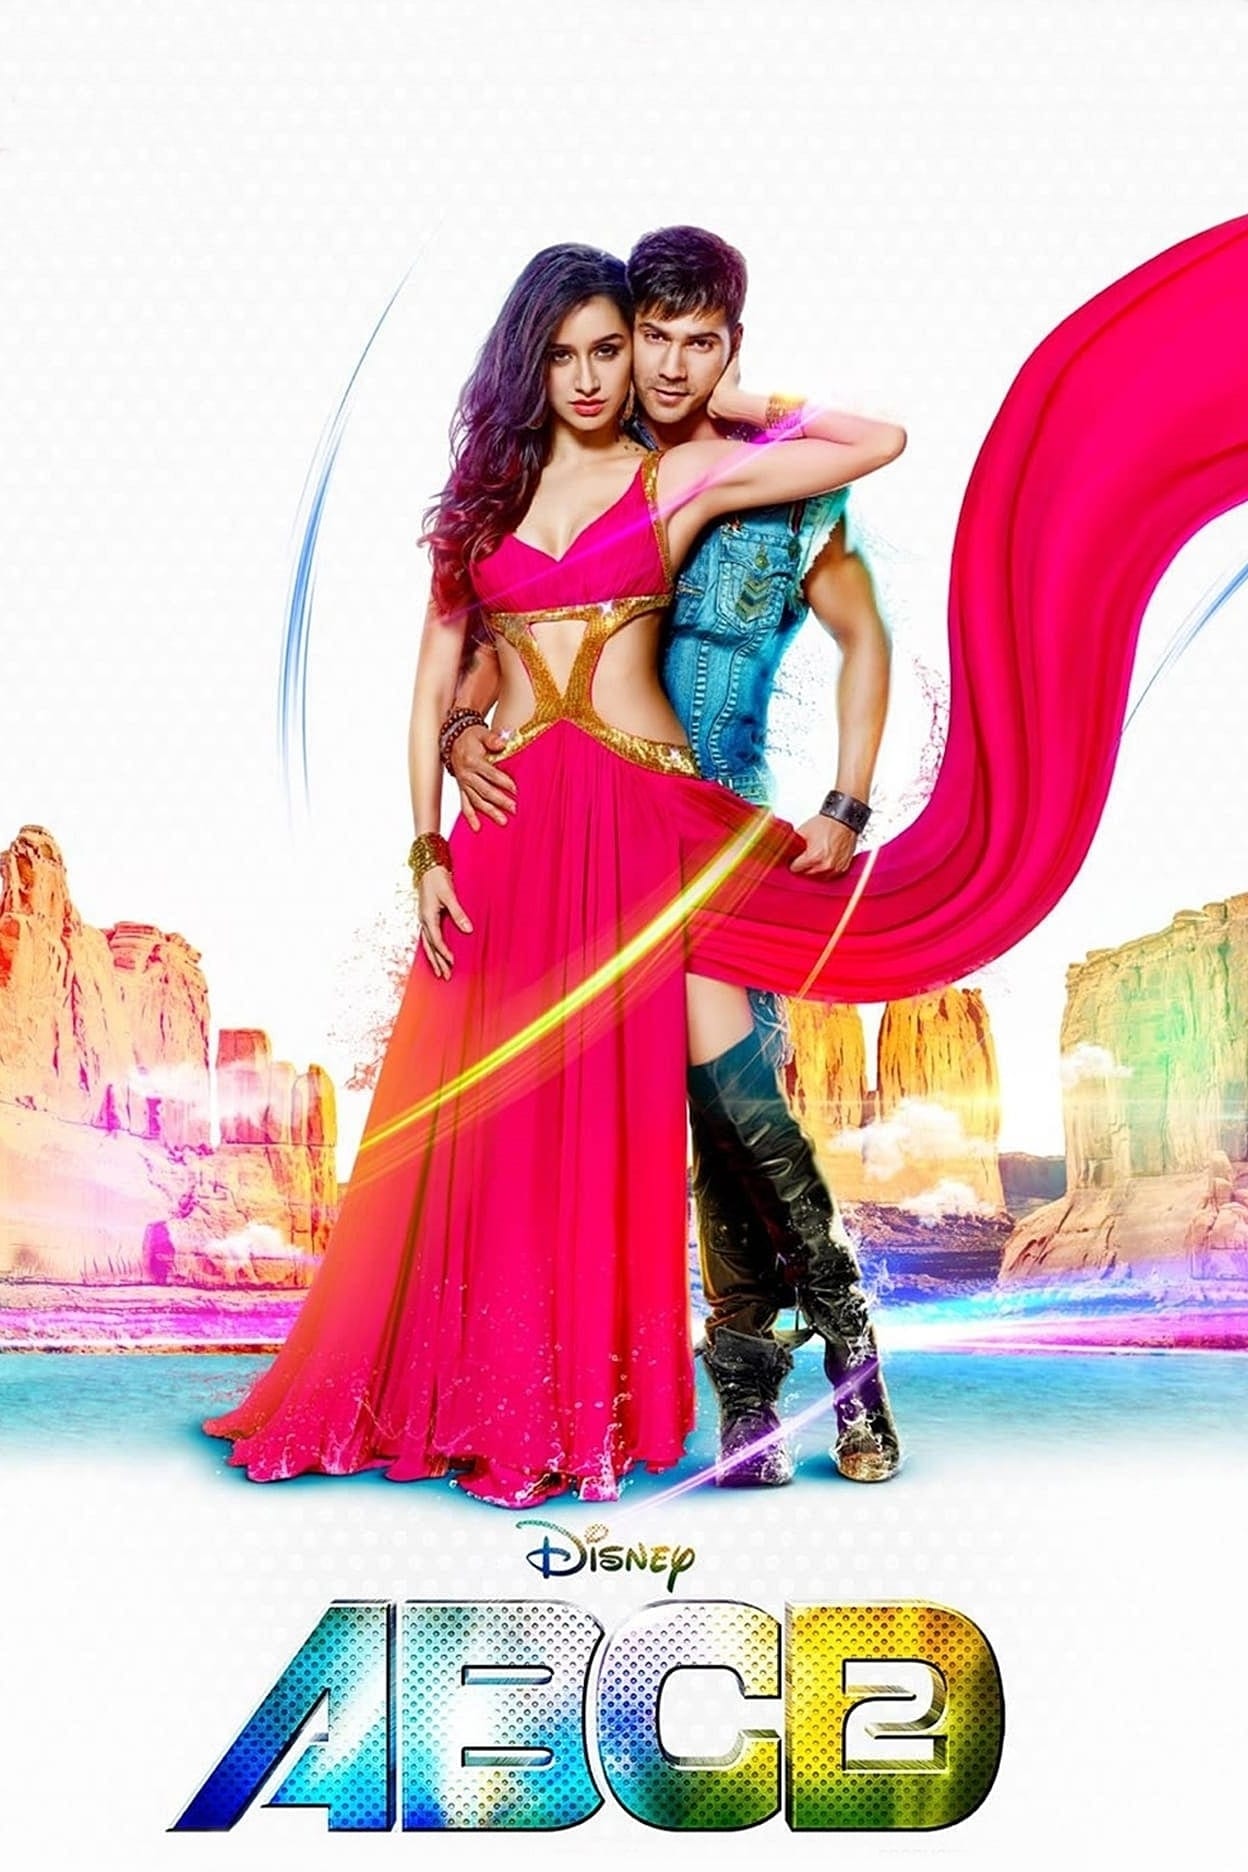 Poster for the movie "ABCD 2"